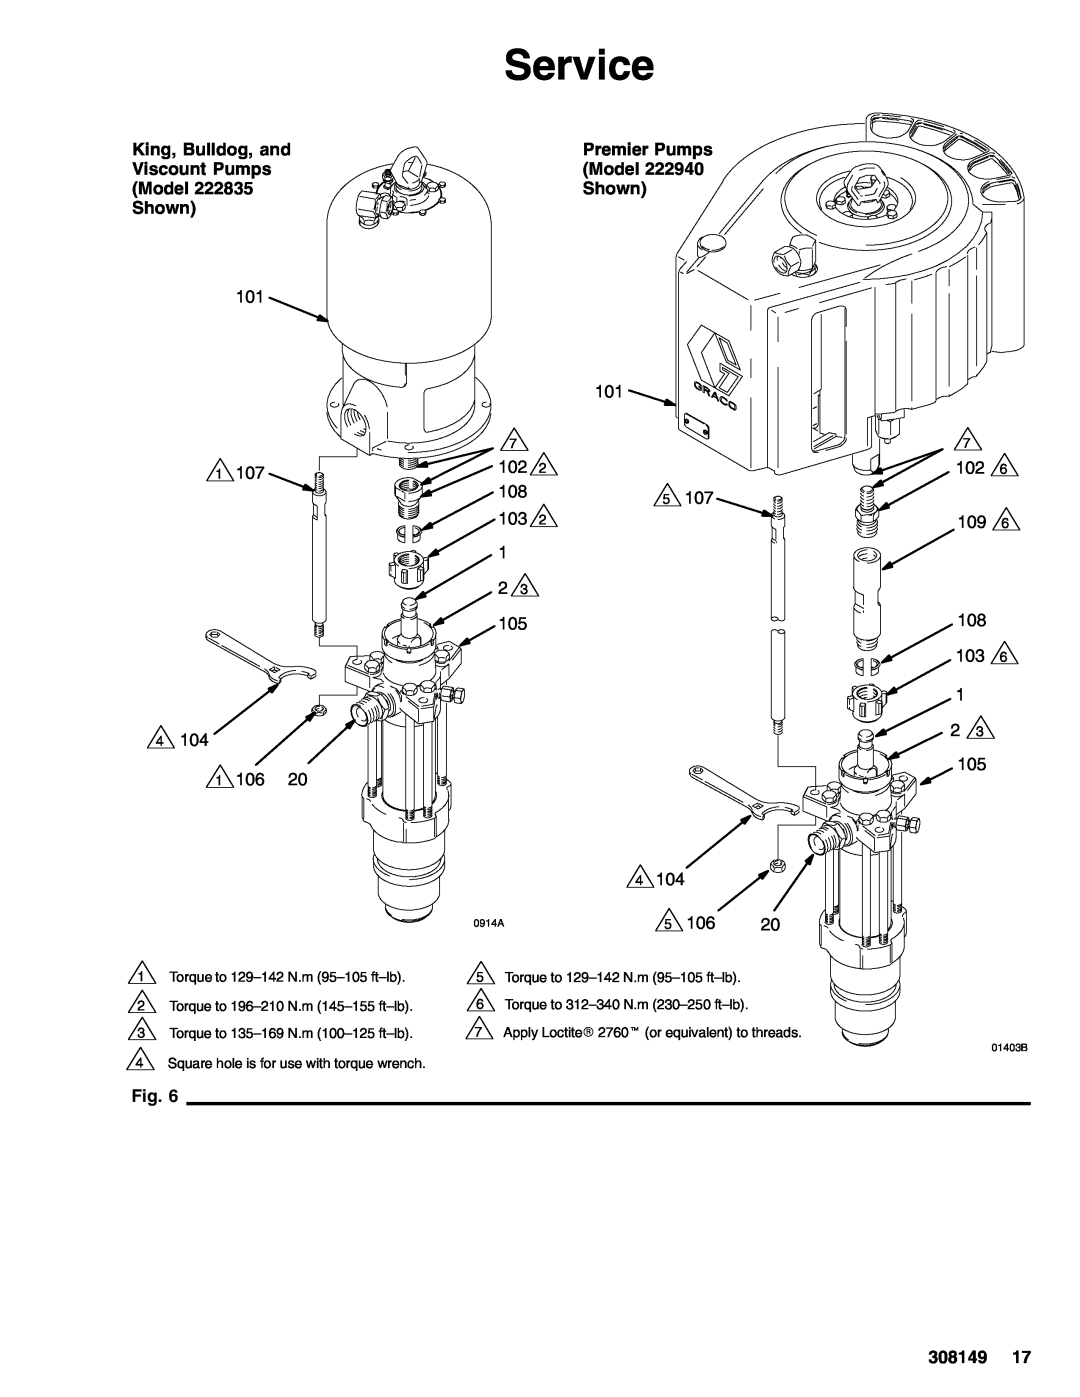 Graco 308149P important safety instructions Service, King, Bulldog, and, Premier Pumps, Viscount Pumps, Model, Shown 